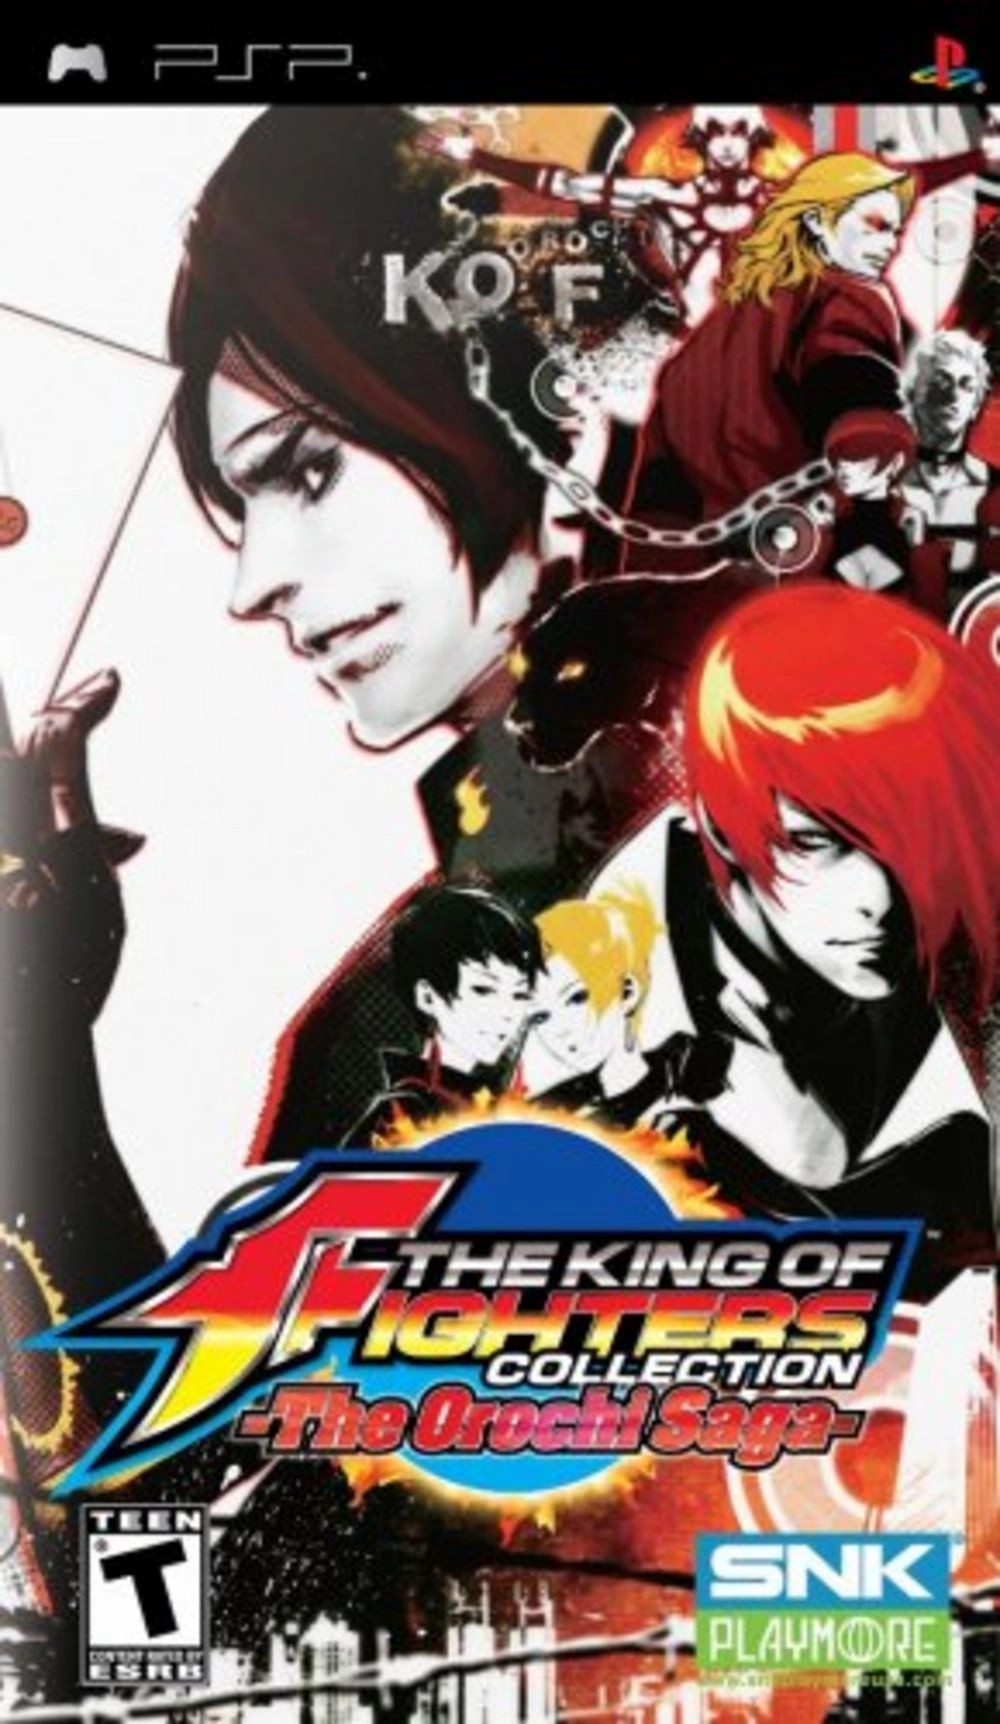 The King of Fighters Collection: The Orochi Saga [PSP]